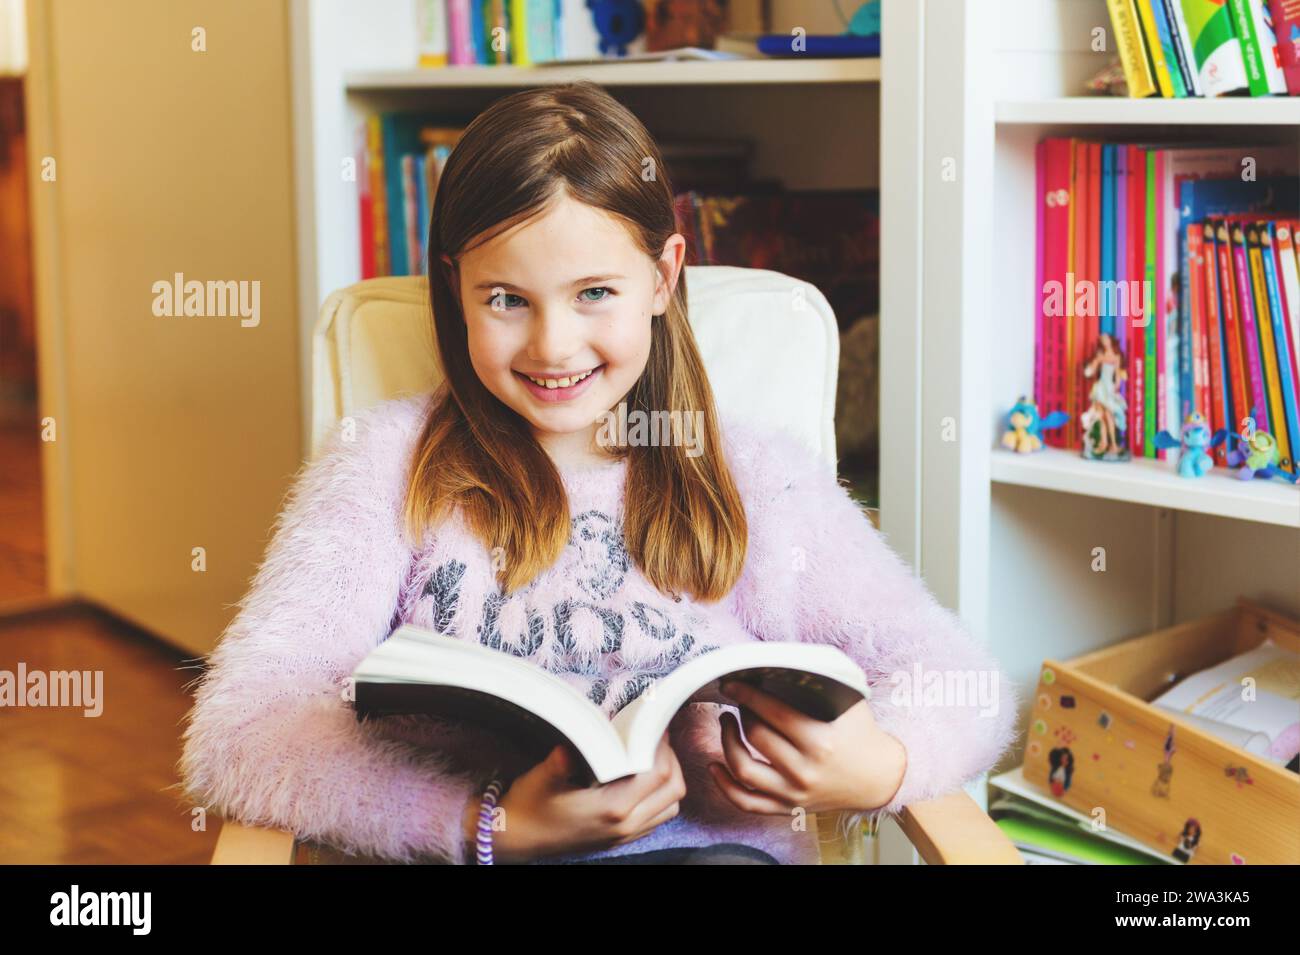 Portrait of 8-9 year old kid girl reading book at home Stock Photo